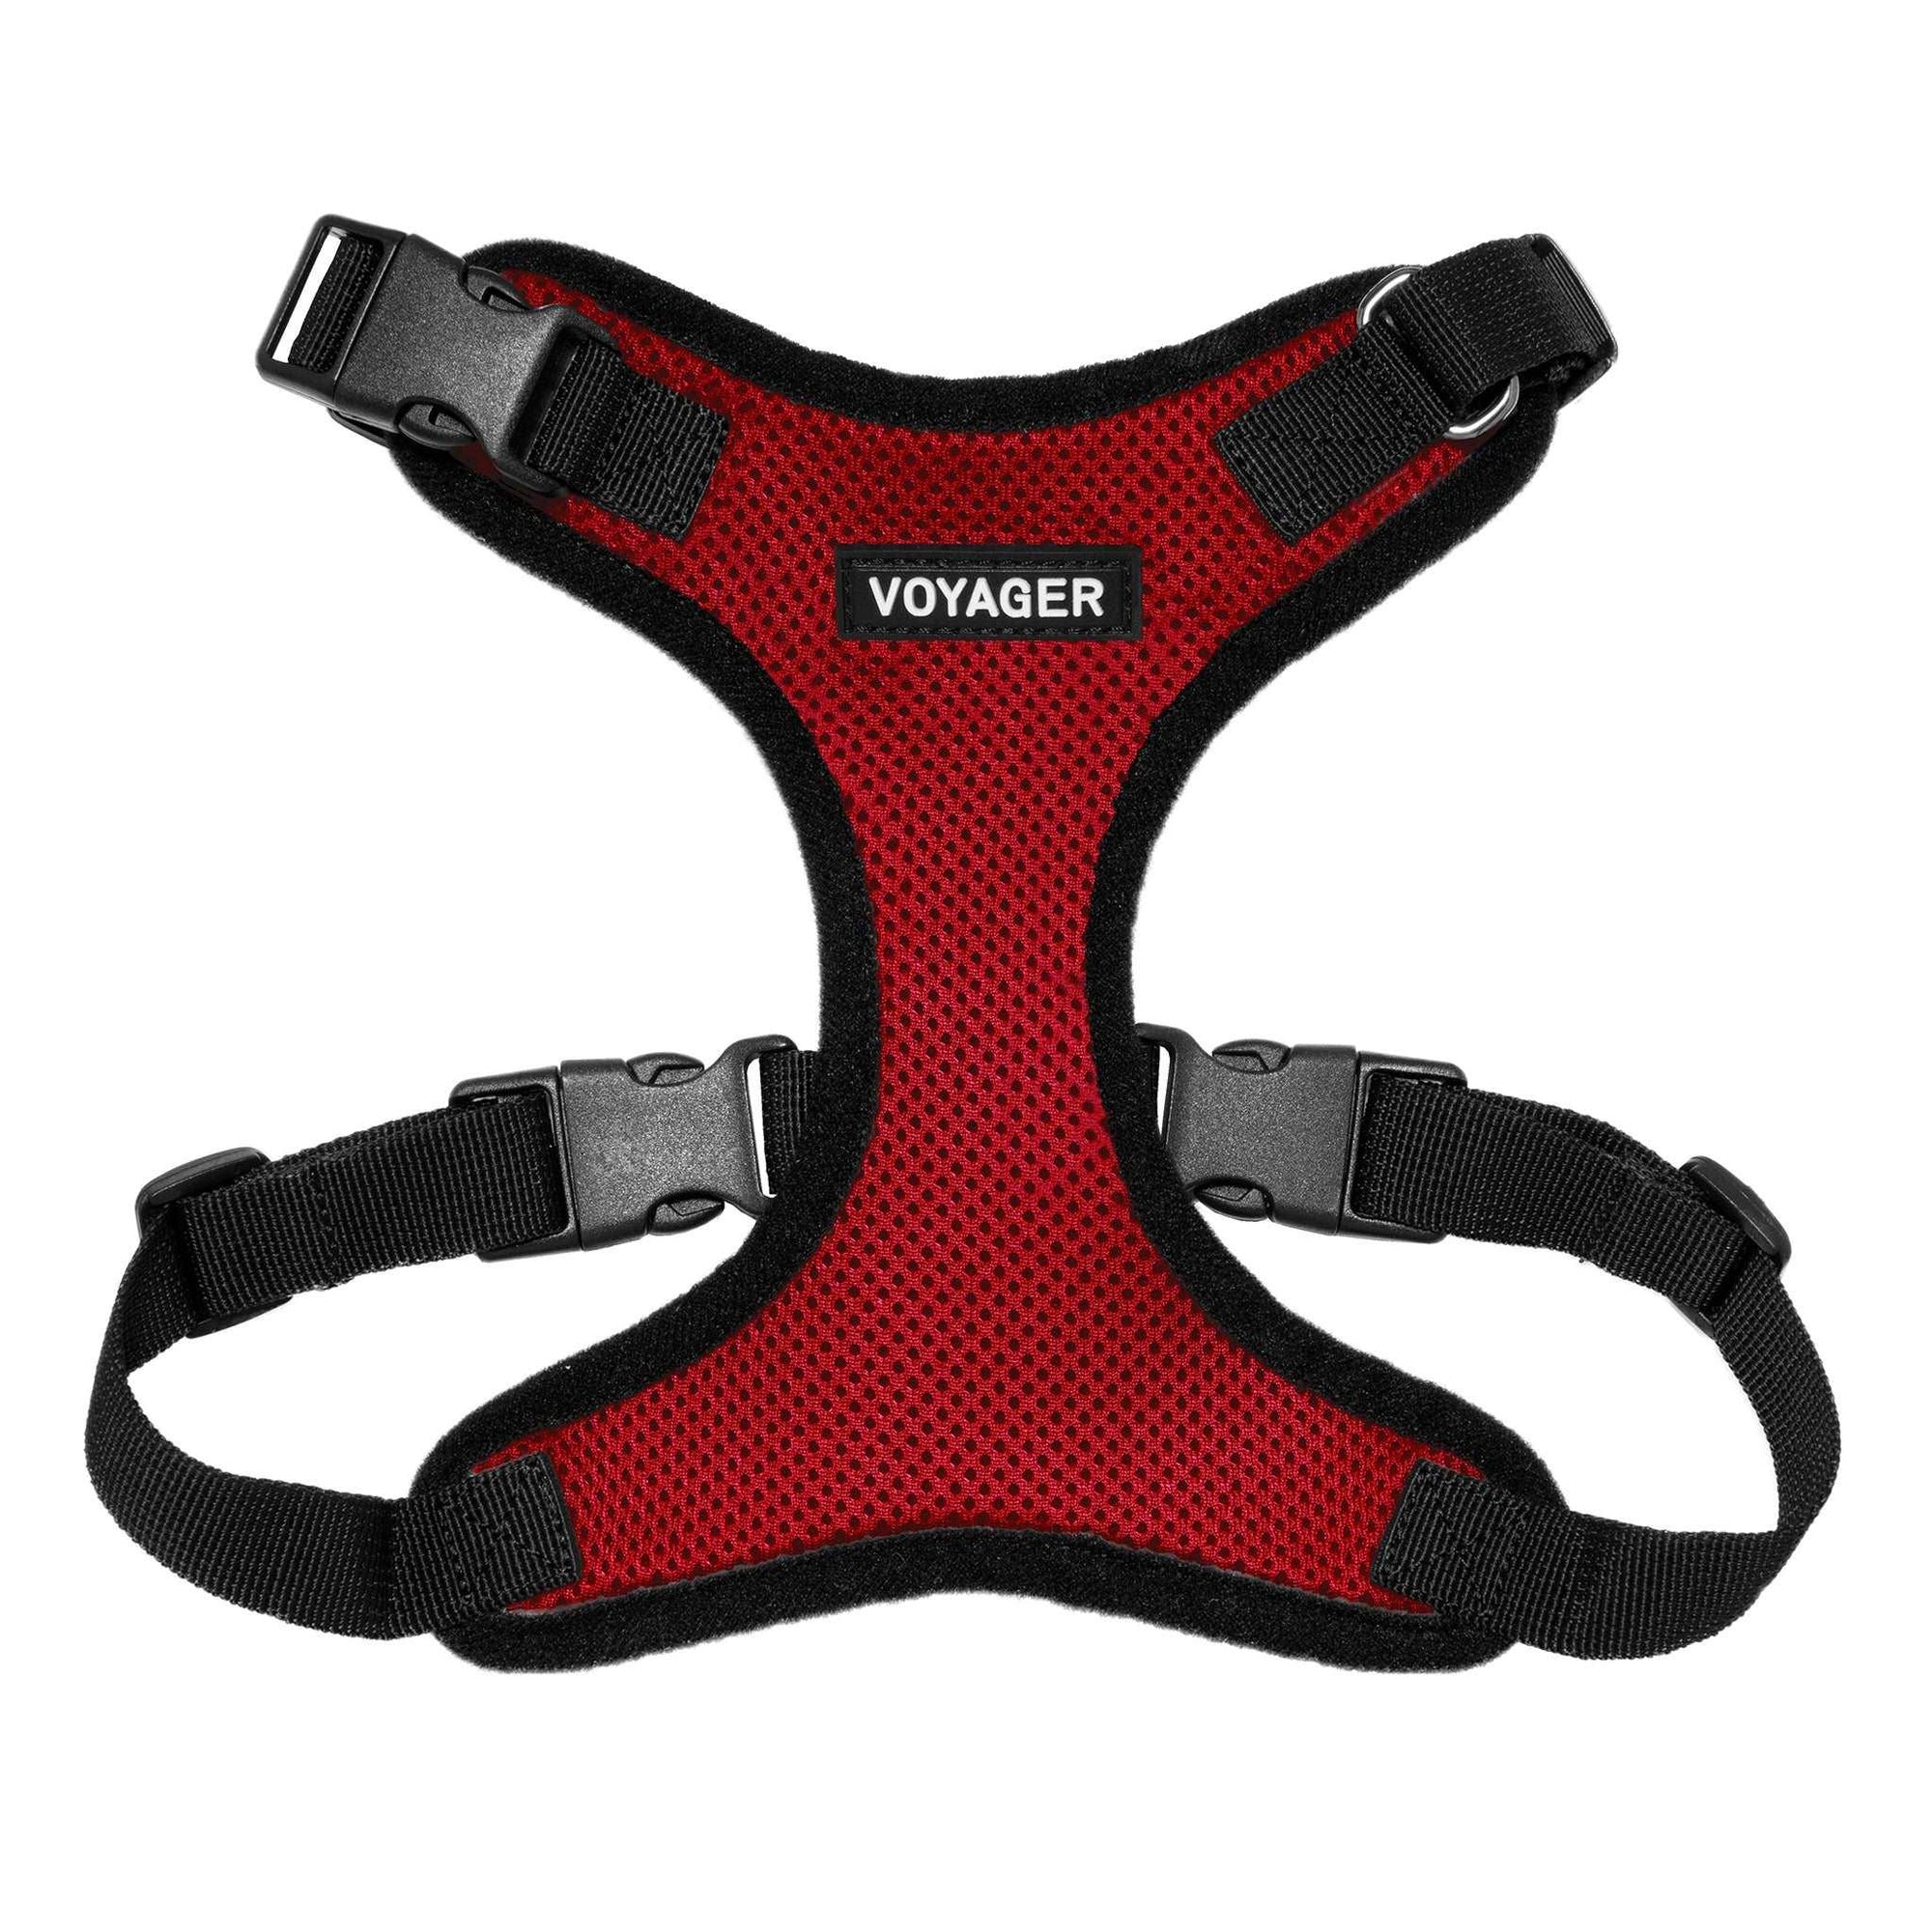 VOYAGER Step-In Lock Dog Harness in Red with Black Trim and Webbing - Front